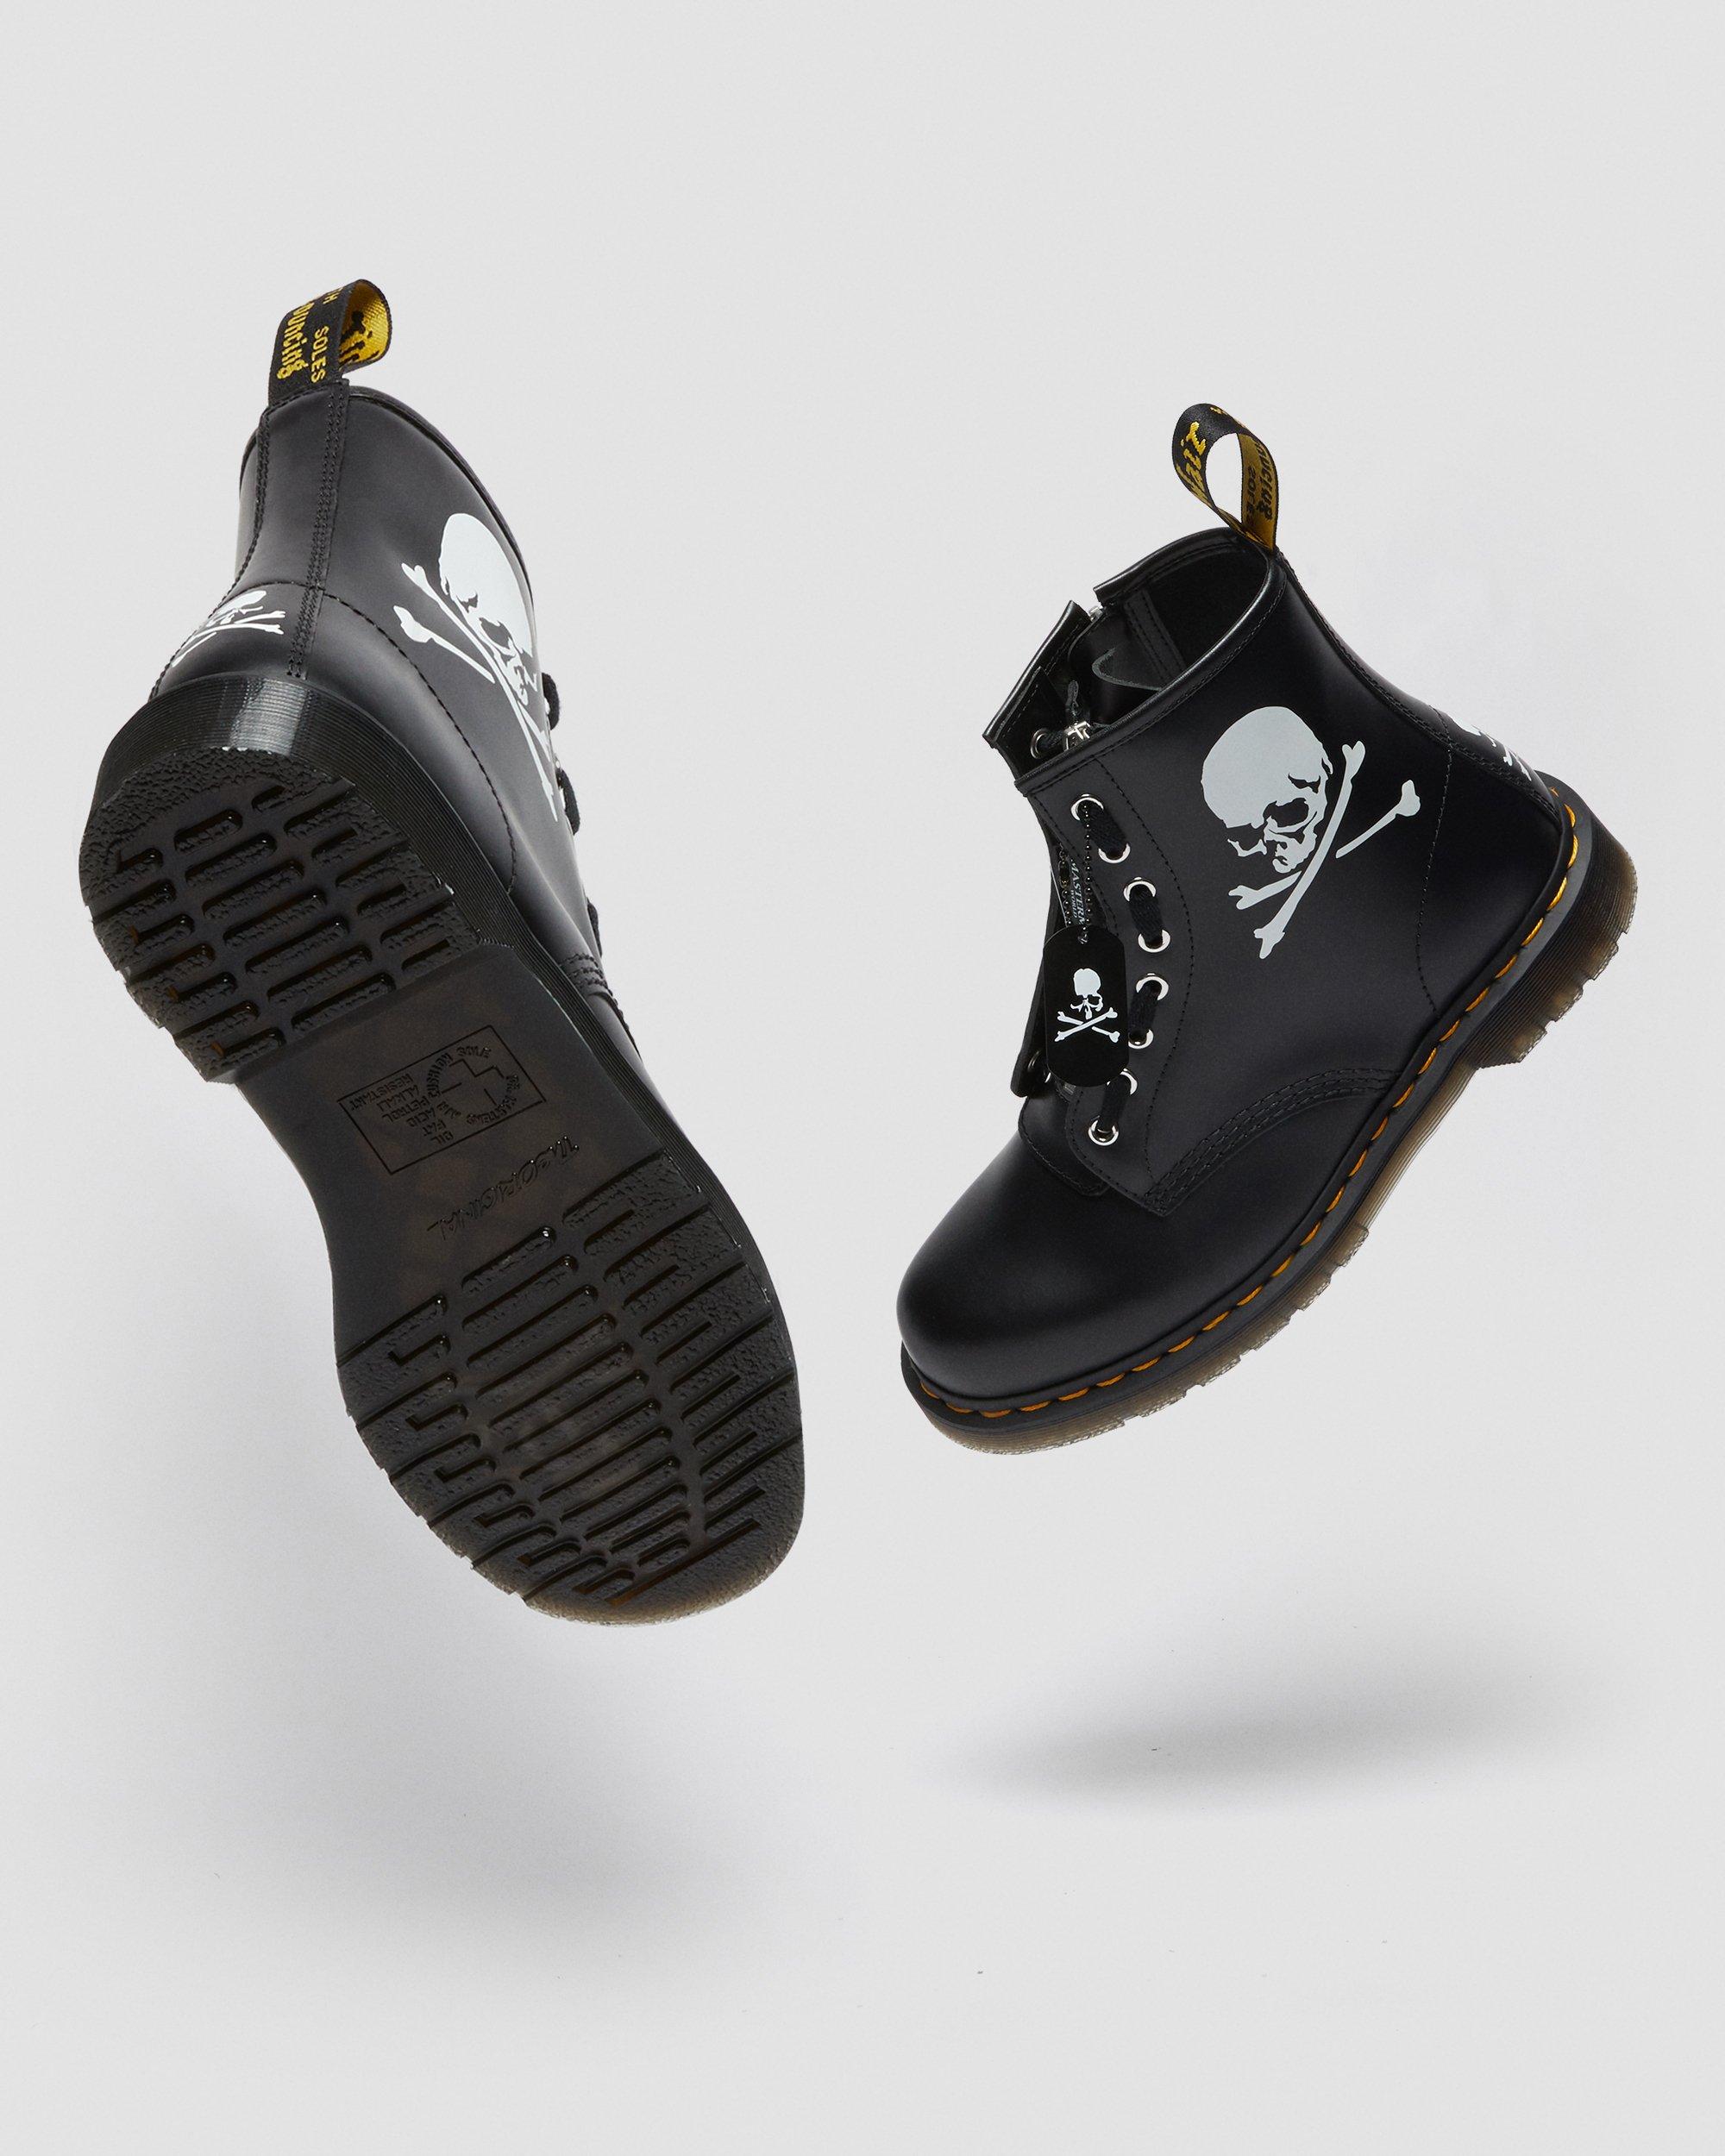 DR MARTENS 1460 Mastermind Leather Lace Up Boots